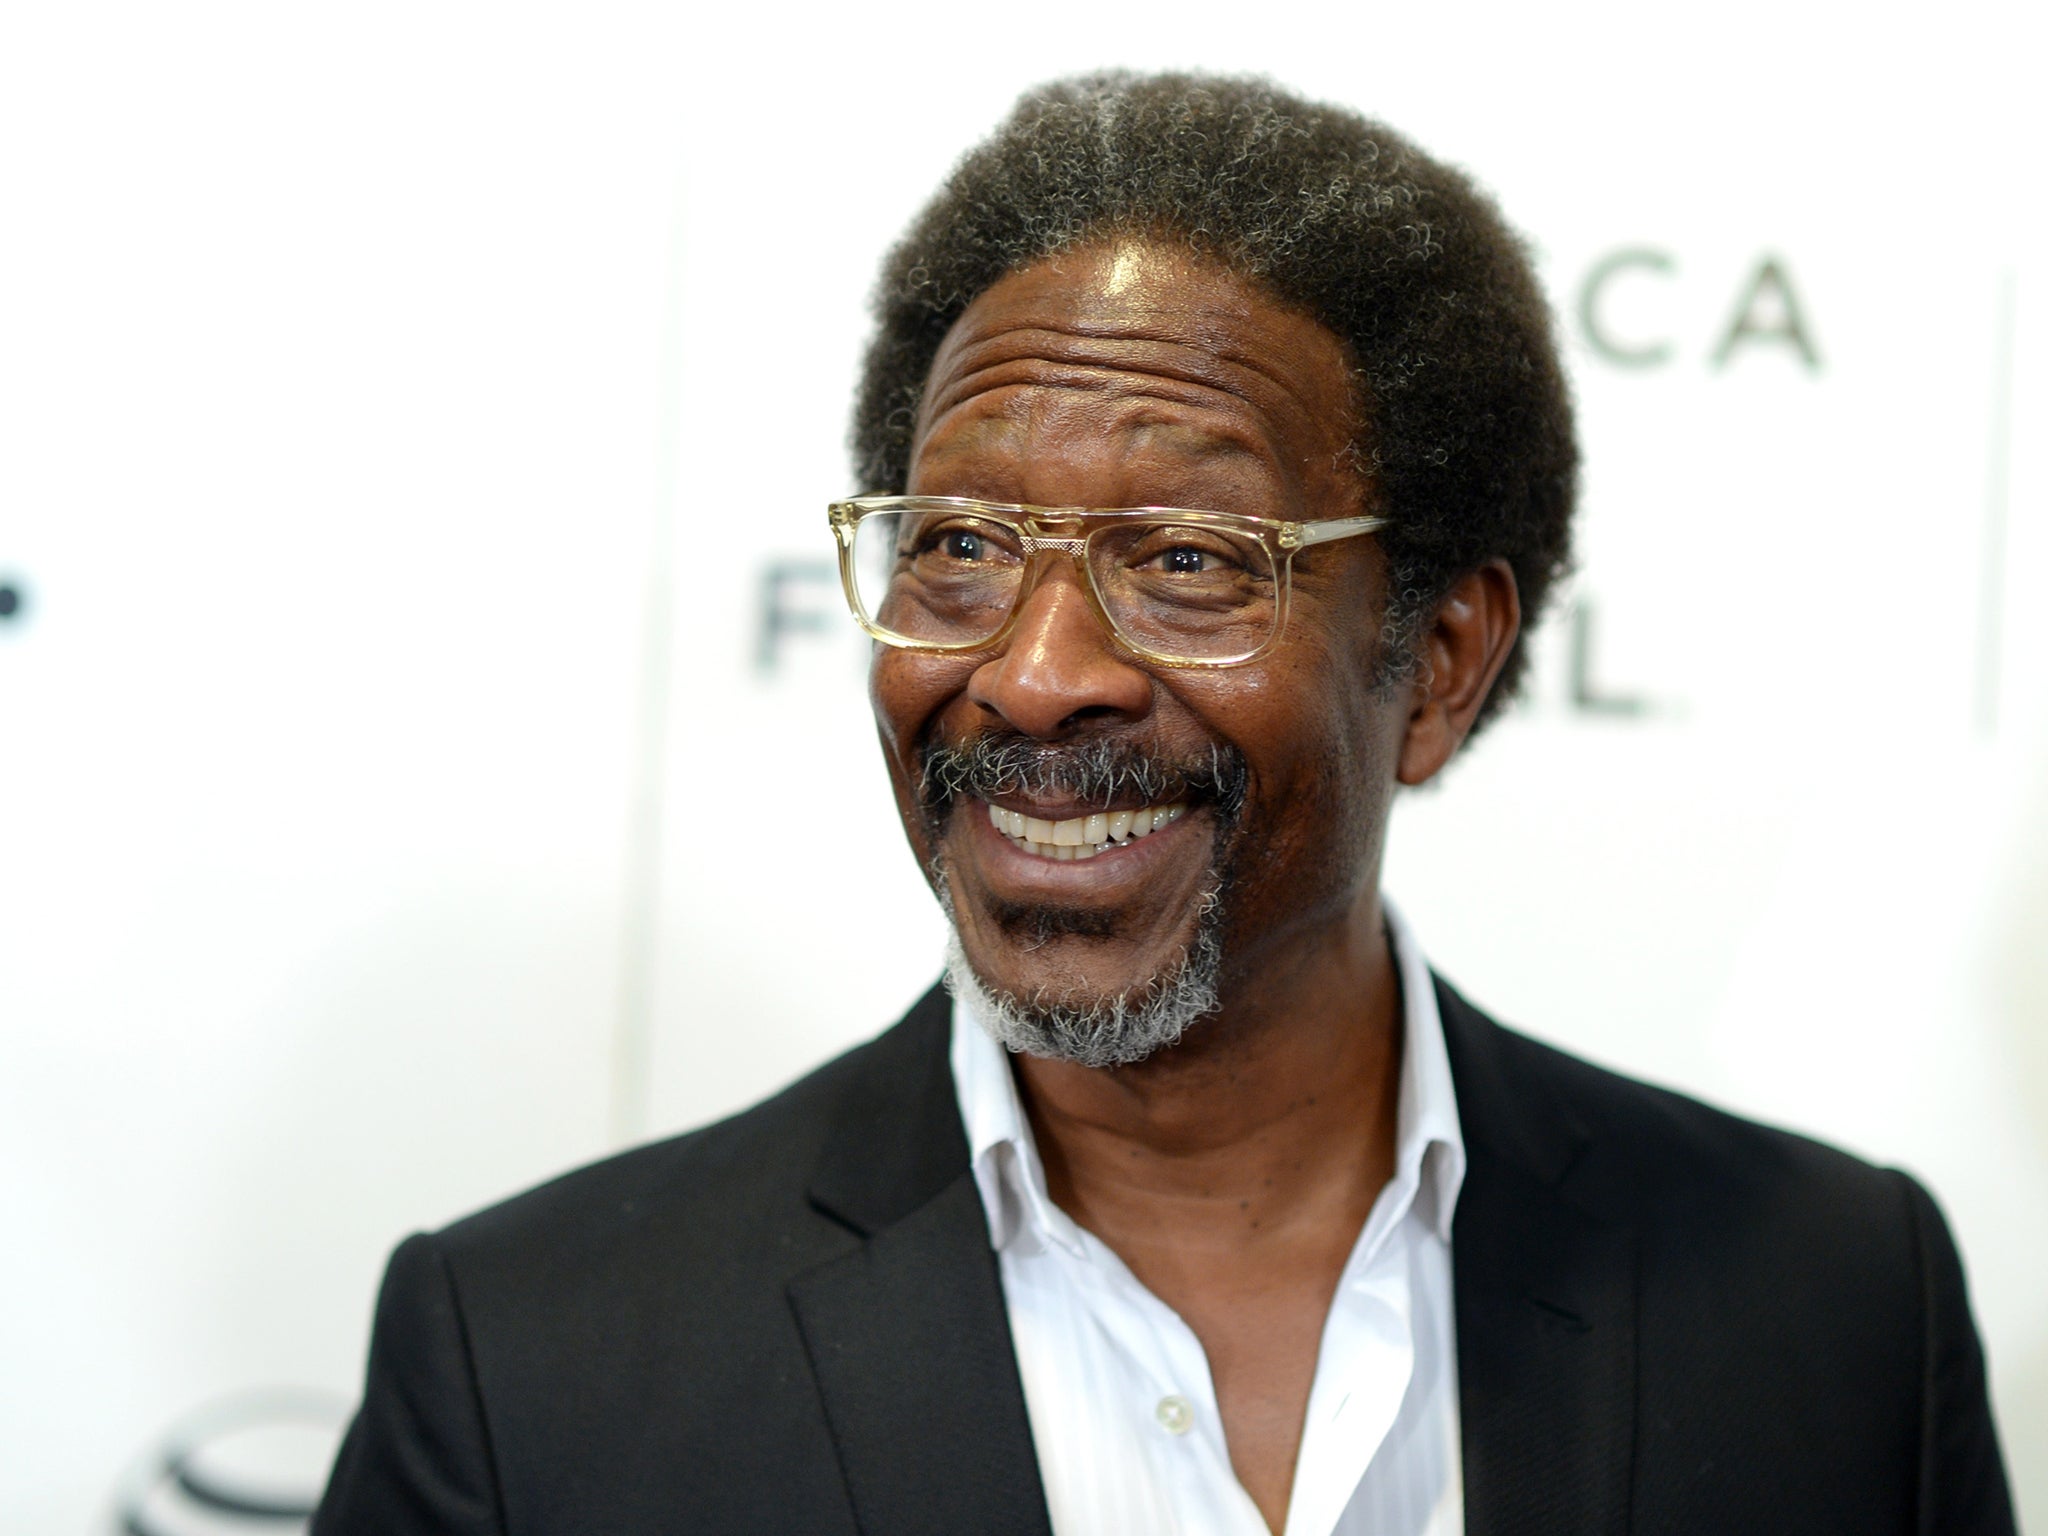 The Wire's Clarke Peters stars as a a real-life, pioneering black navvy